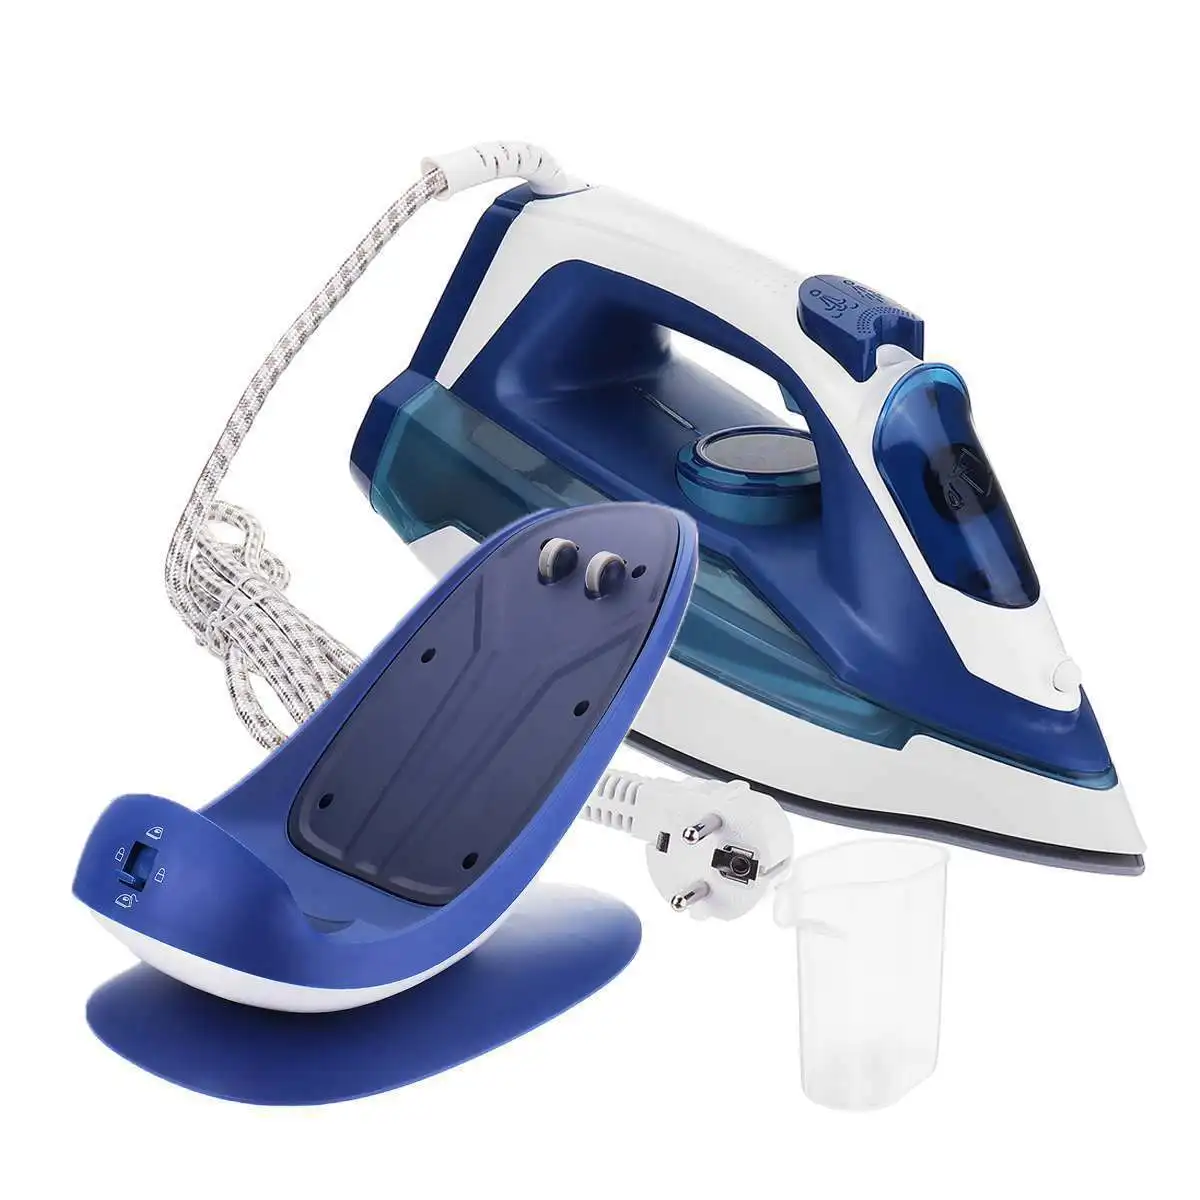 Professional Grade Clothes Steamer Cordless Steam Iron 2400W Overheat Safety Protection & Variable Steam Control